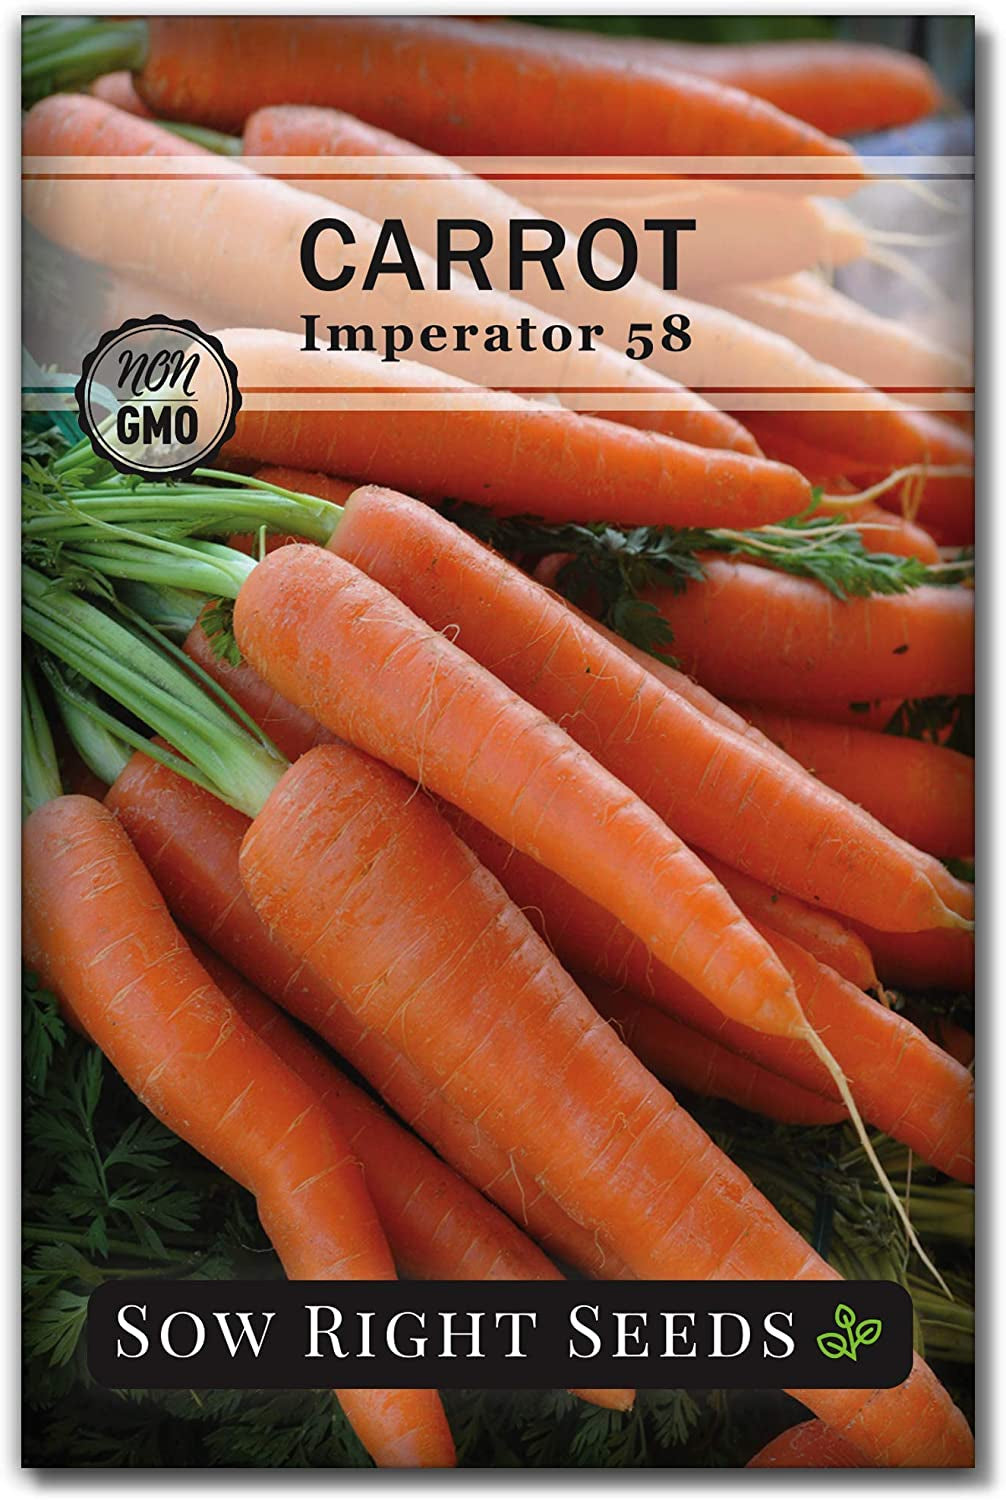 - Imperator 58 Carrot Seed for Planting - Non-Gmo Heirloom Packet with Instructions to Plant a Home Vegetable Garden - Indoors or Outdoors - Long Variety, Super Sweet (1)